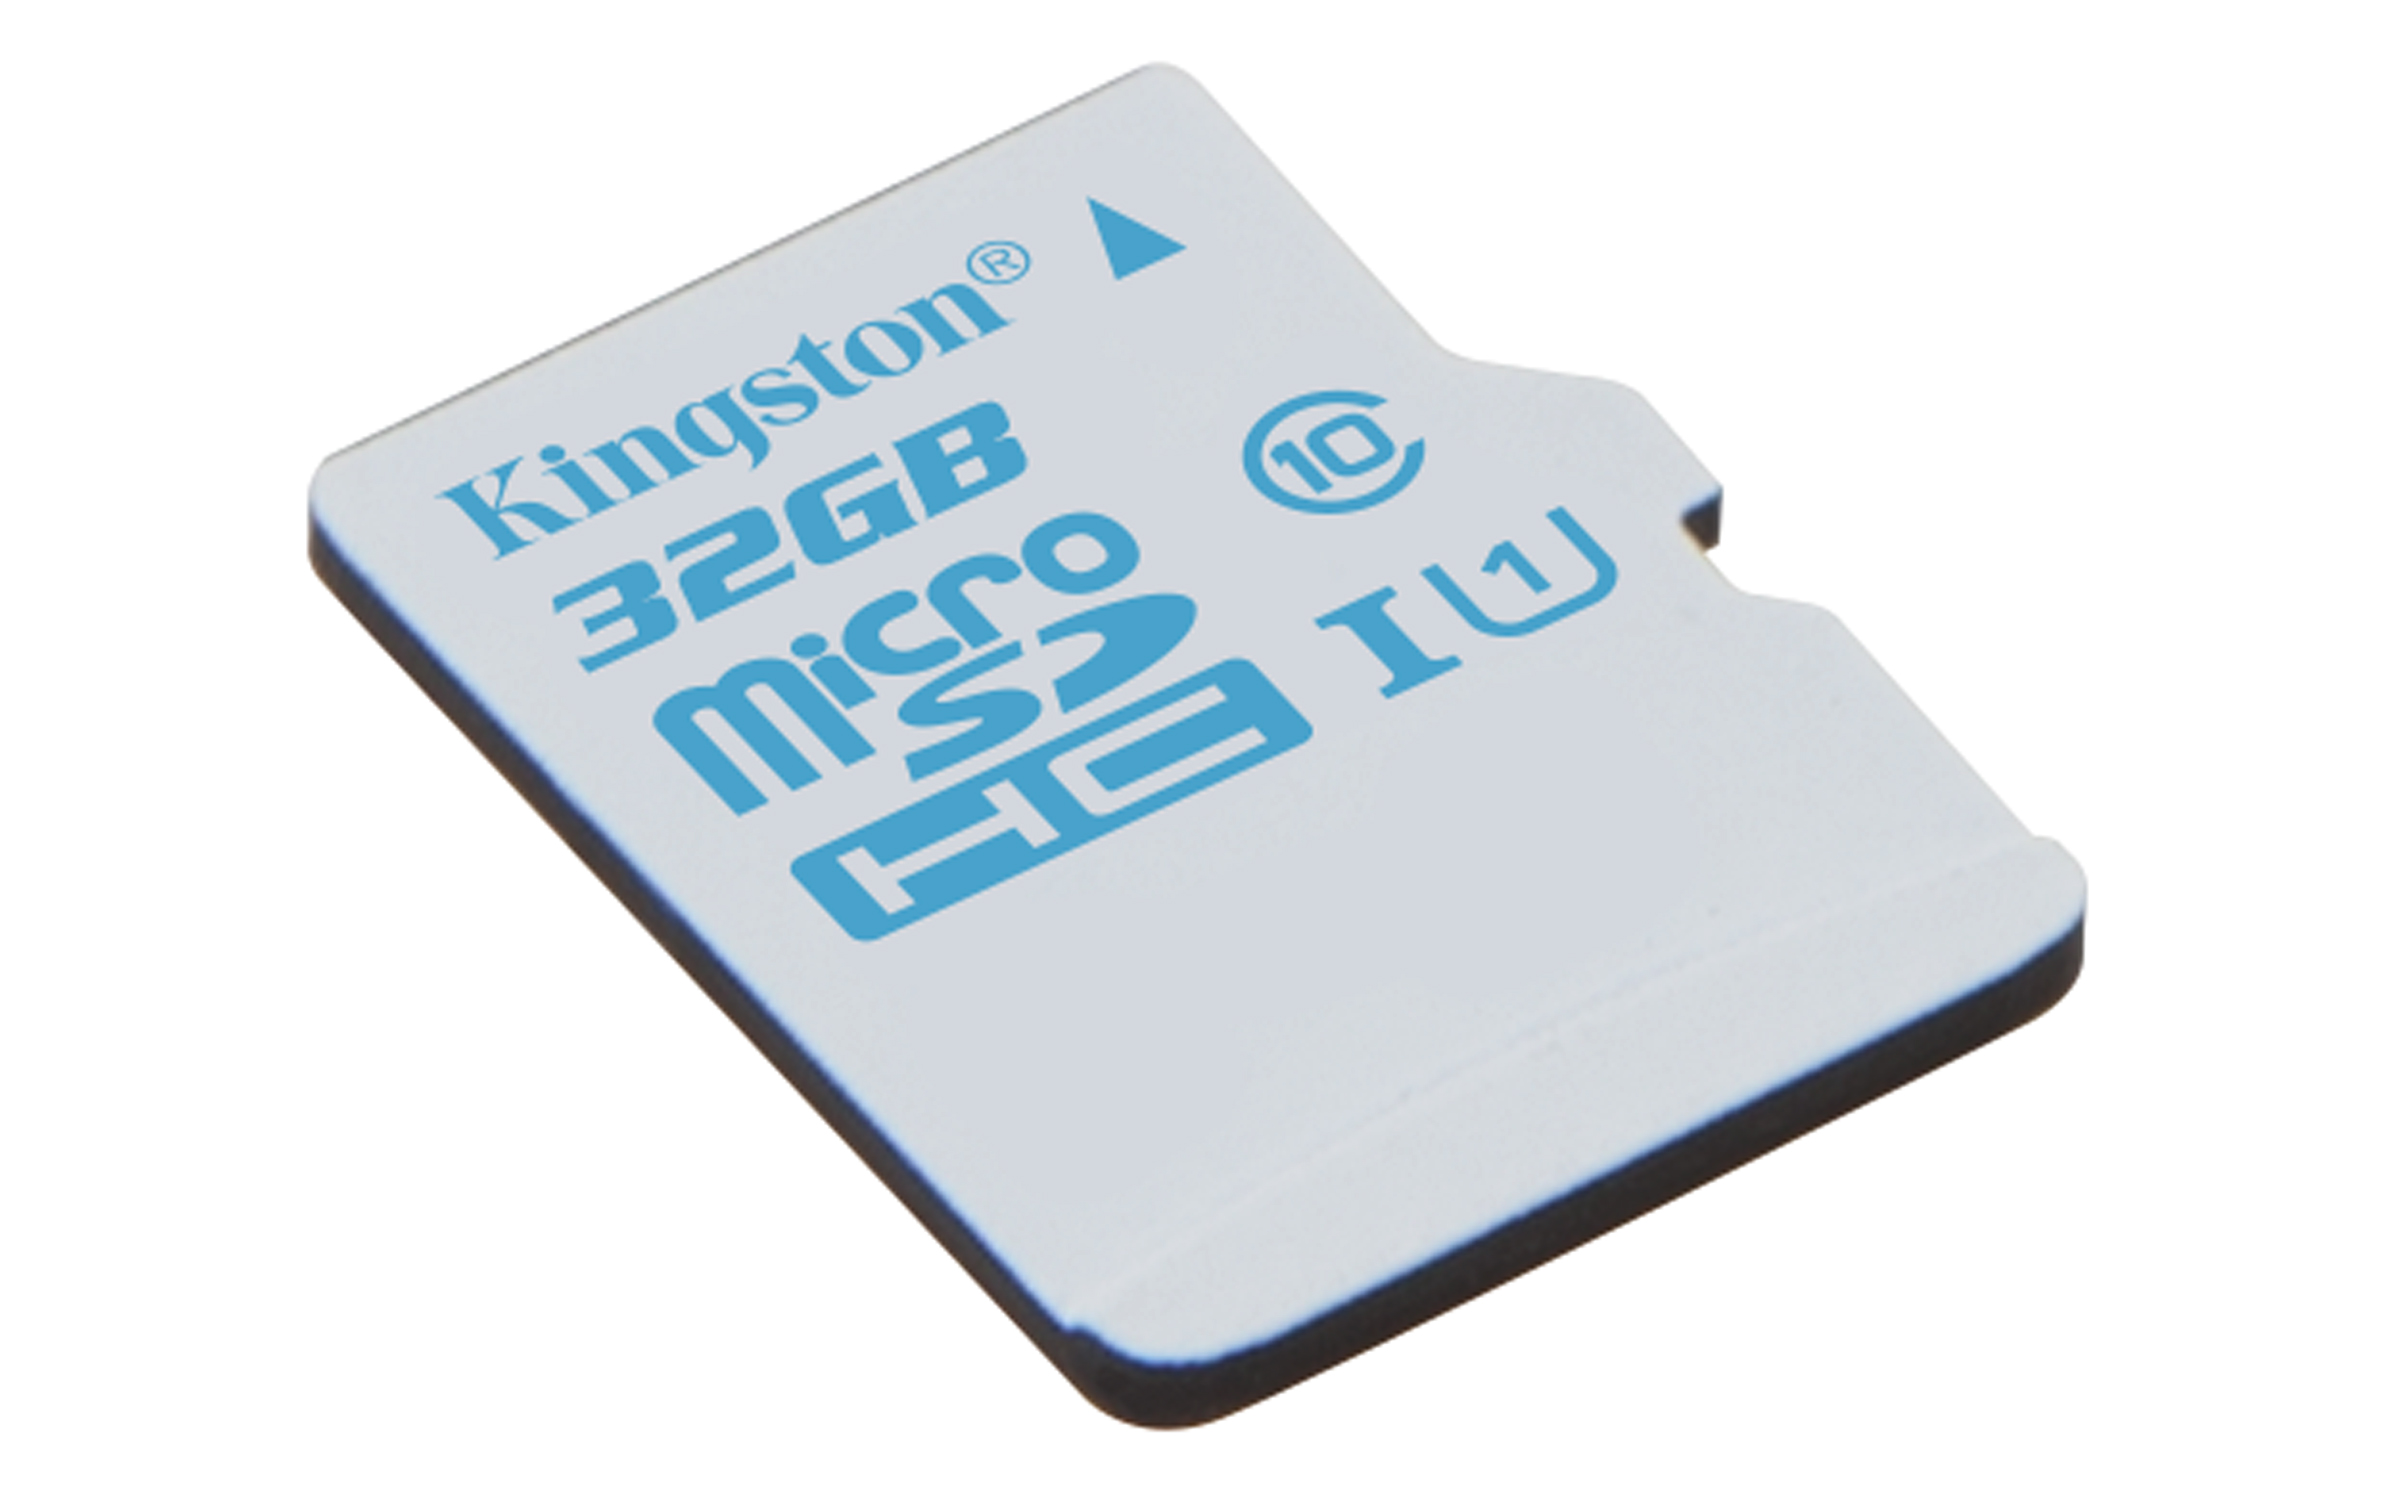 Also available in 64GB - Kingston microSD Action Camera UHS-I3 Card